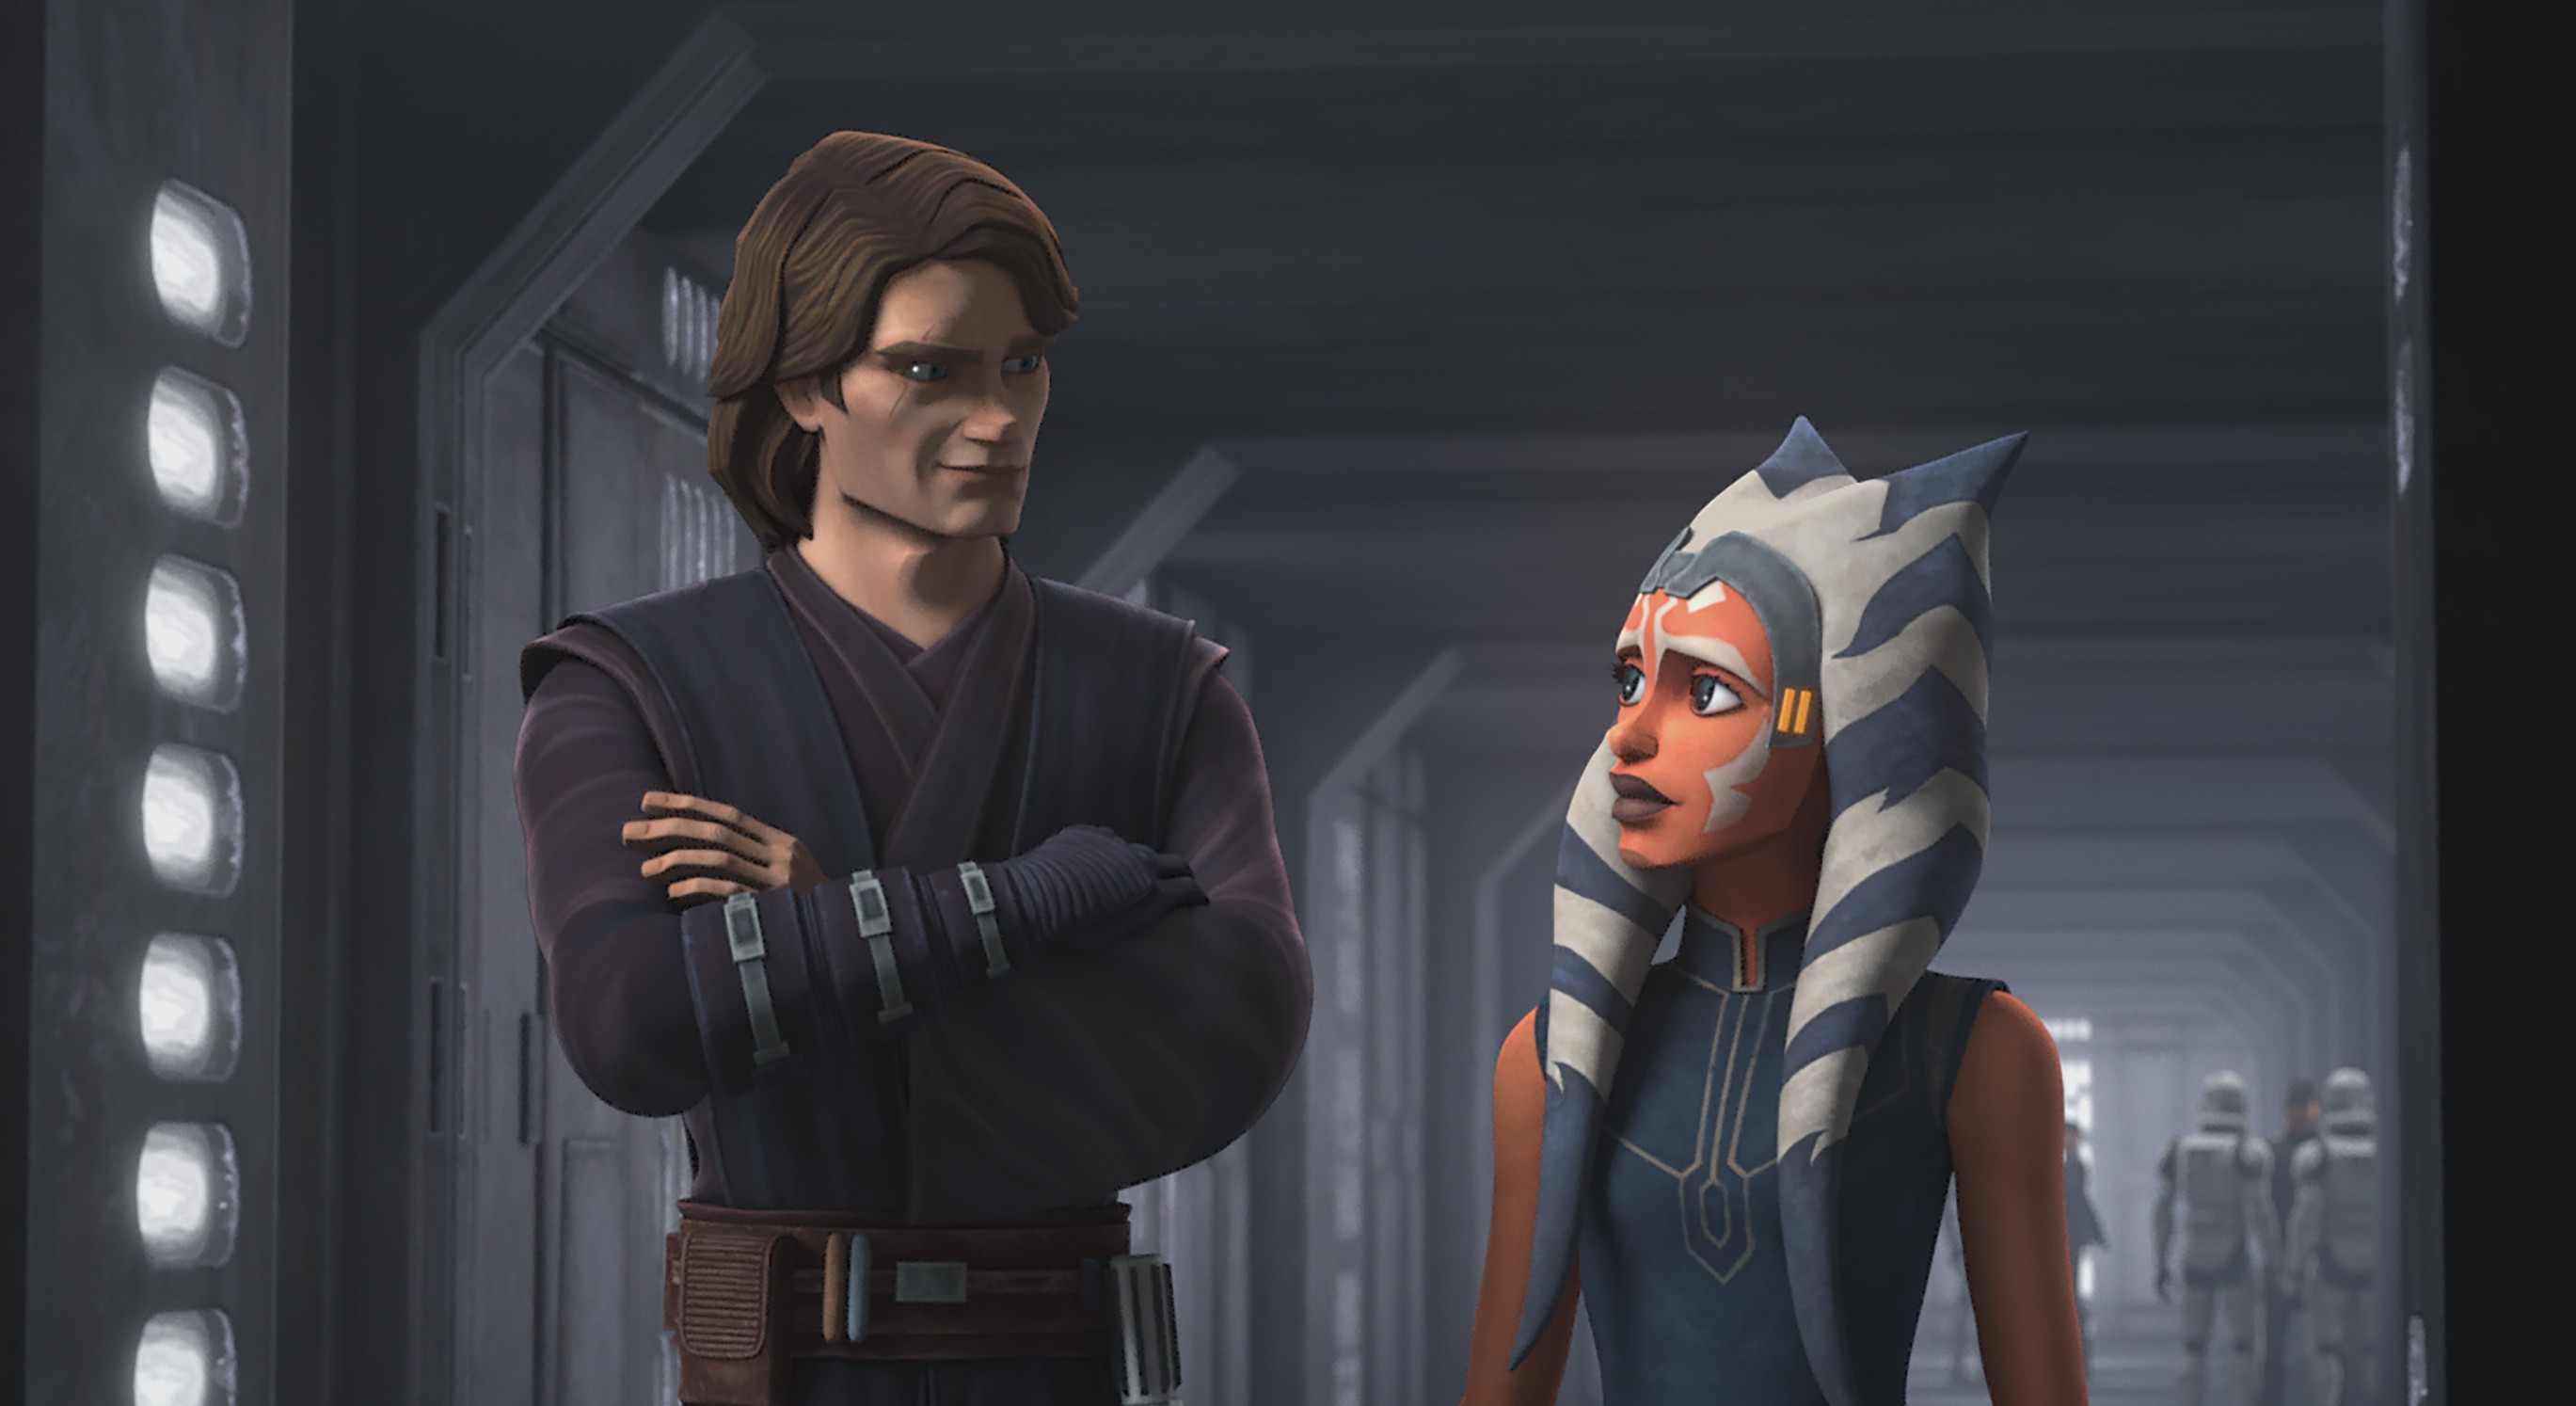 How Star Wars: The Clone Wars Season 7 Shows a Different Side of the Jedi - Den of Geek